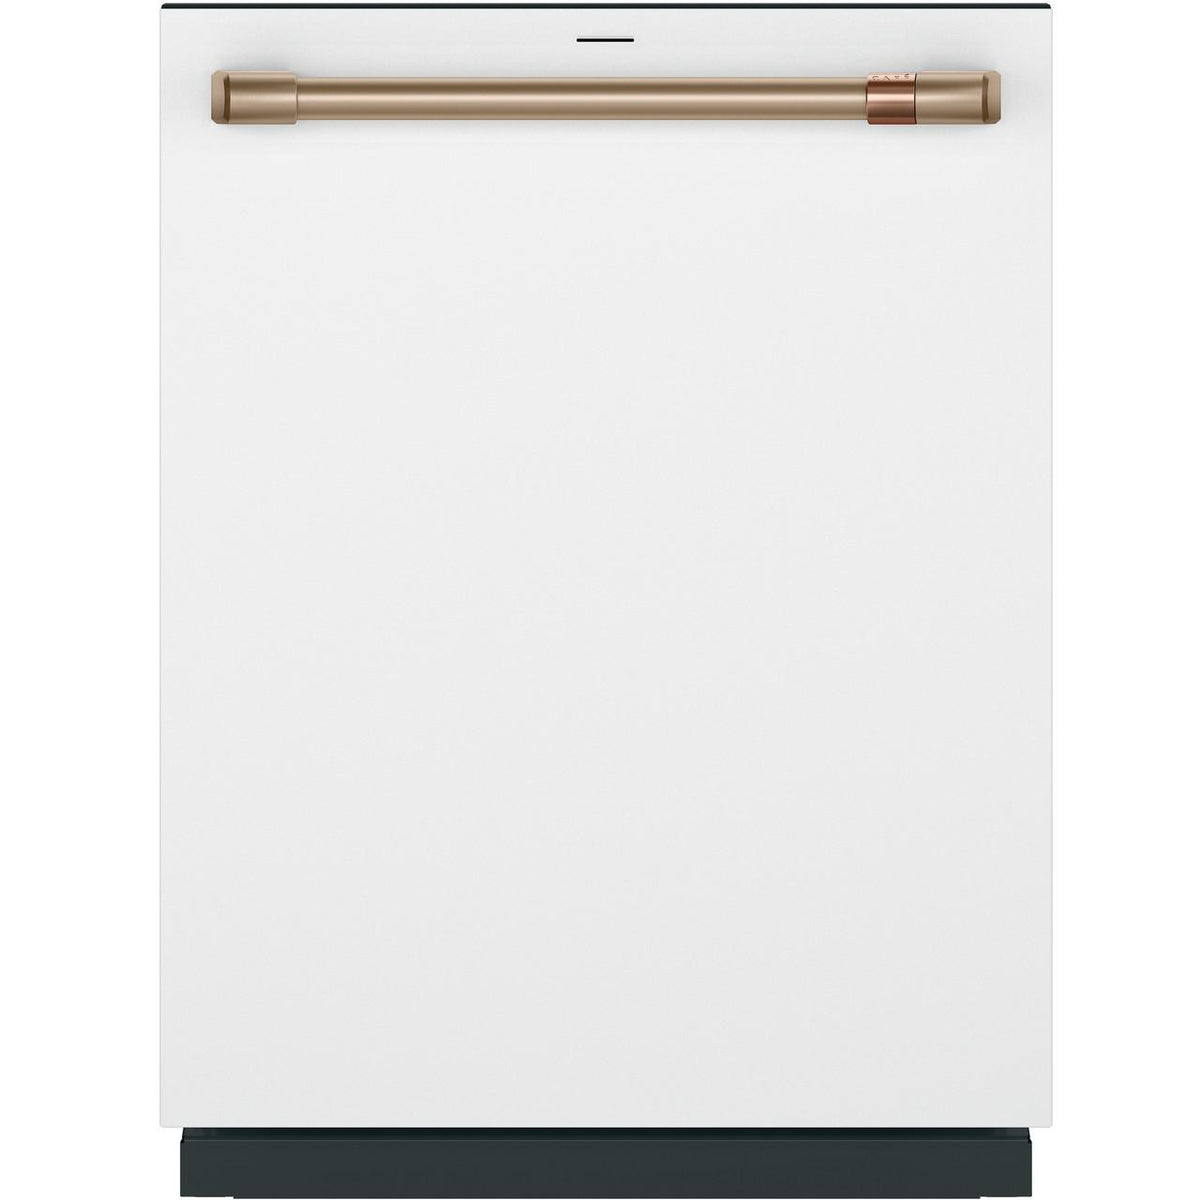 24-inch Built-In Dishwasher with WiFi CDT888P4VW2 IMAGE 1